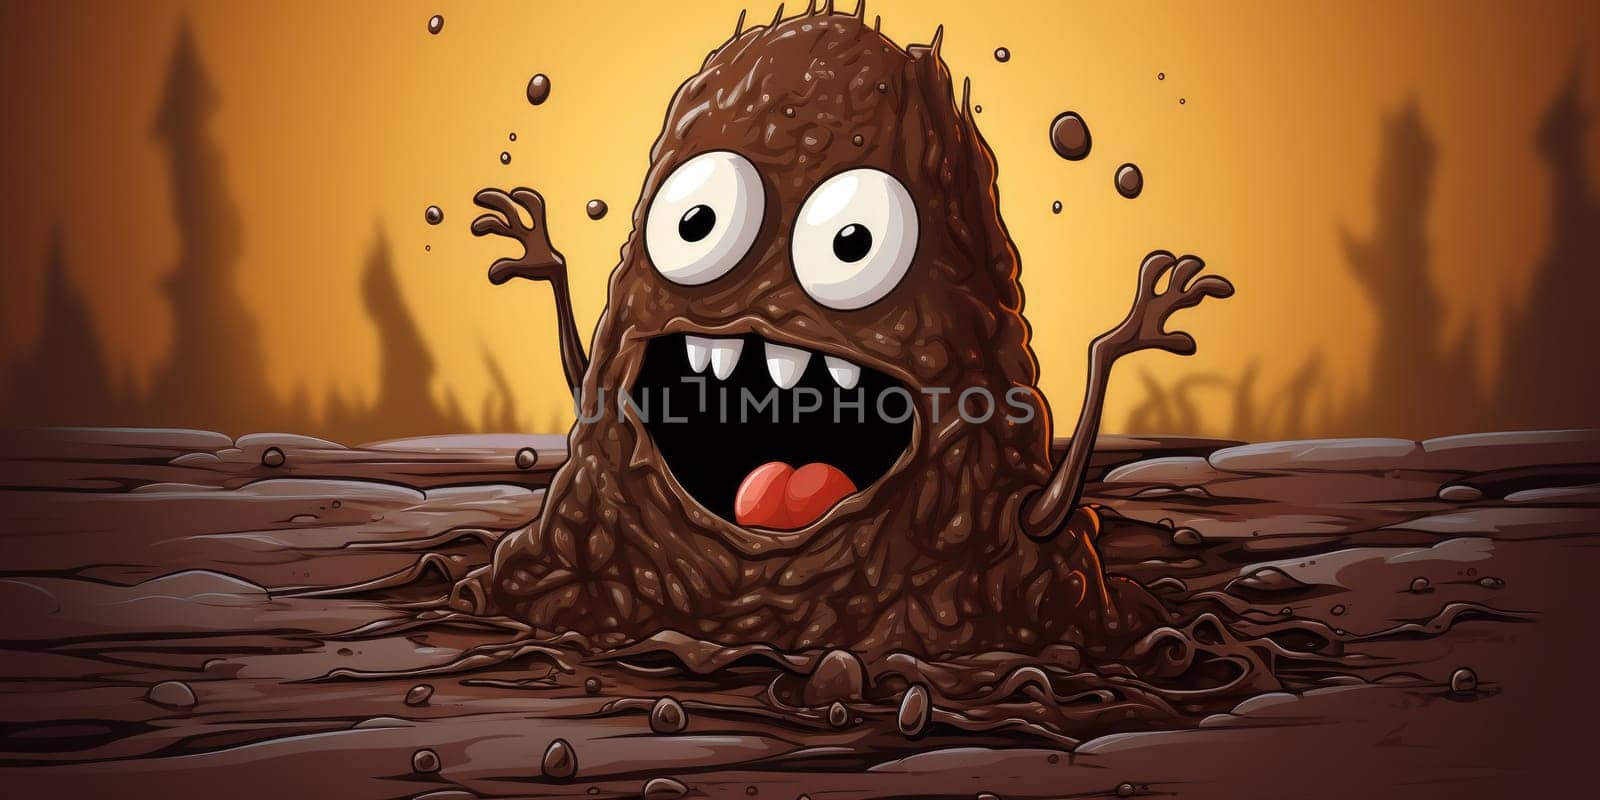 Smiling poop or turd as an illustration, funny concept